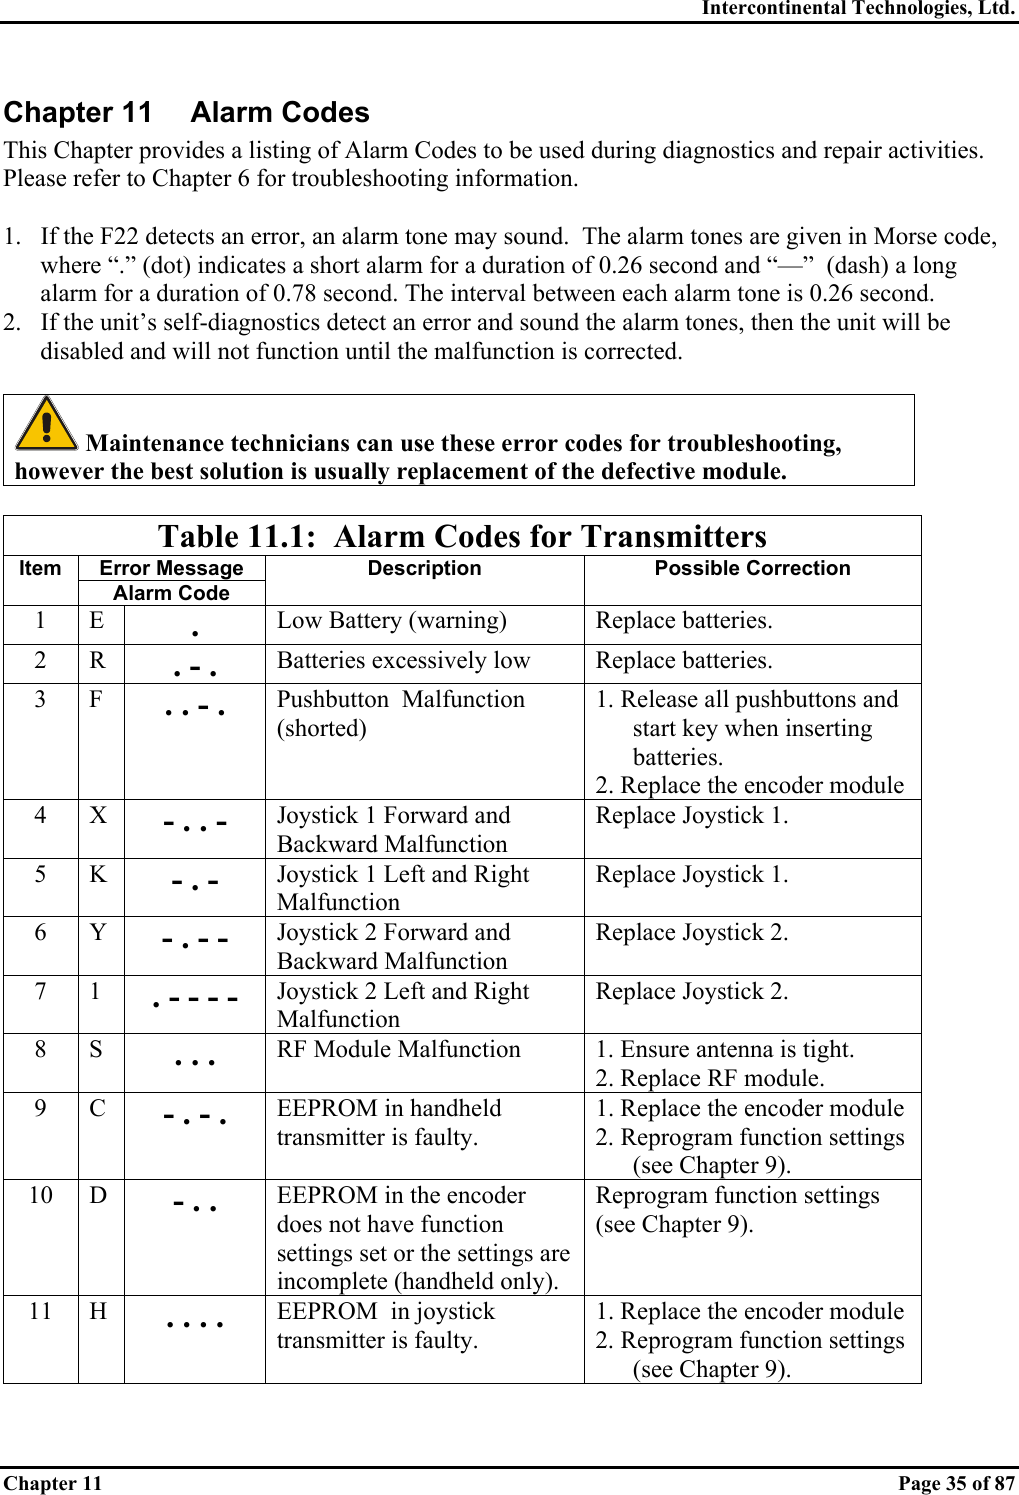 Intercontinental Technologies, Ltd. Chapter 11    Page 35 of 87 Chapter 11  Alarm Codes This Chapter provides a listing of Alarm Codes to be used during diagnostics and repair activities.  Please refer to Chapter 6 for troubleshooting information.  1.  If the F22 detects an error, an alarm tone may sound.  The alarm tones are given in Morse code, where “.” (dot) indicates a short alarm for a duration of 0.26 second and “—”  (dash) a long alarm for a duration of 0.78 second. The interval between each alarm tone is 0.26 second. 2.  If the unit’s self-diagnostics detect an error and sound the alarm tones, then the unit will be disabled and will not function until the malfunction is corrected.   Maintenance technicians can use these error codes for troubleshooting, however the best solution is usually replacement of the defective module.  Table 11.1:  Alarm Codes for Transmitters Error Message Item Alarm Code Description Possible Correction 1 E . Low Battery (warning)  Replace batteries. 2 R . - . Batteries excessively low  Replace batteries. 3 F . . - . Pushbutton  Malfunction     (shorted) 1. Release all pushbuttons and start key when inserting batteries. 2. Replace the encoder module 4 X - . . - Joystick 1 Forward and Backward Malfunction Replace Joystick 1. 5 K - . - Joystick 1 Left and Right Malfunction Replace Joystick 1. 6 Y - . - - Joystick 2 Forward and Backward Malfunction Replace Joystick 2. 7 1 . - - - - Joystick 2 Left and Right Malfunction Replace Joystick 2. 8 S . . .  RF Module Malfunction  1. Ensure antenna is tight. 2. Replace RF module. 9 C - . - . EEPROM in handheld transmitter is faulty. 1. Replace the encoder module 2. Reprogram function settings (see Chapter 9). 10 D - . . EEPROM in the encoder does not have function settings set or the settings are incomplete (handheld only). Reprogram function settings (see Chapter 9). 11 H . . . . EEPROM  in joystick transmitter is faulty. 1. Replace the encoder module 2. Reprogram function settings (see Chapter 9).  